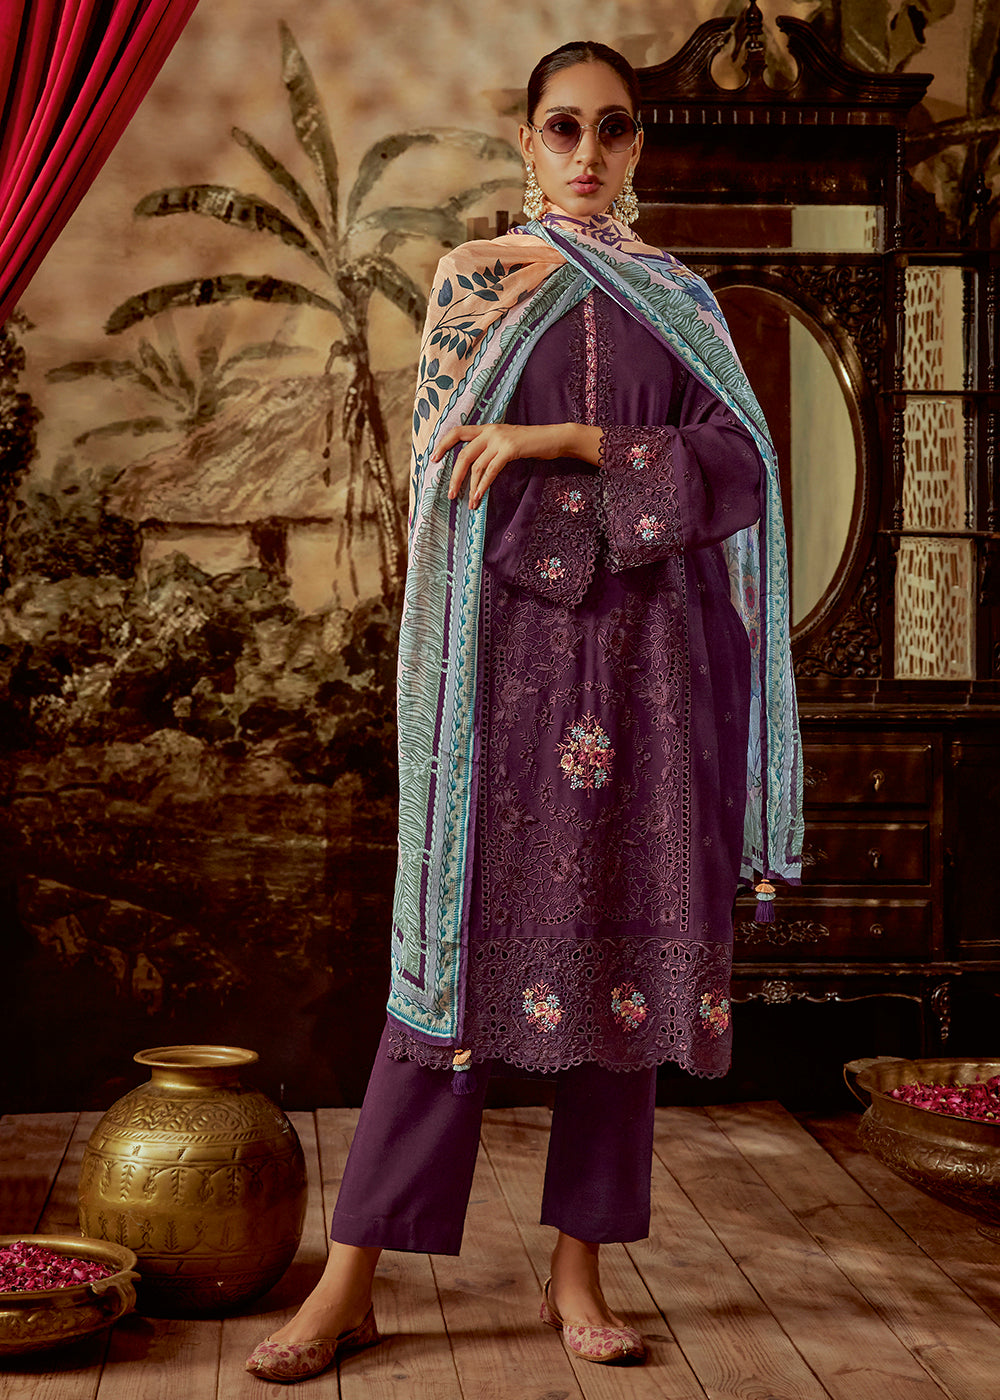 Buy Now Charming Purple Parsi Style Embroidered Festive Salwar Suit Online in USA, UK, Canada, Germany, Australia & Worldwide at Empress Clothing.